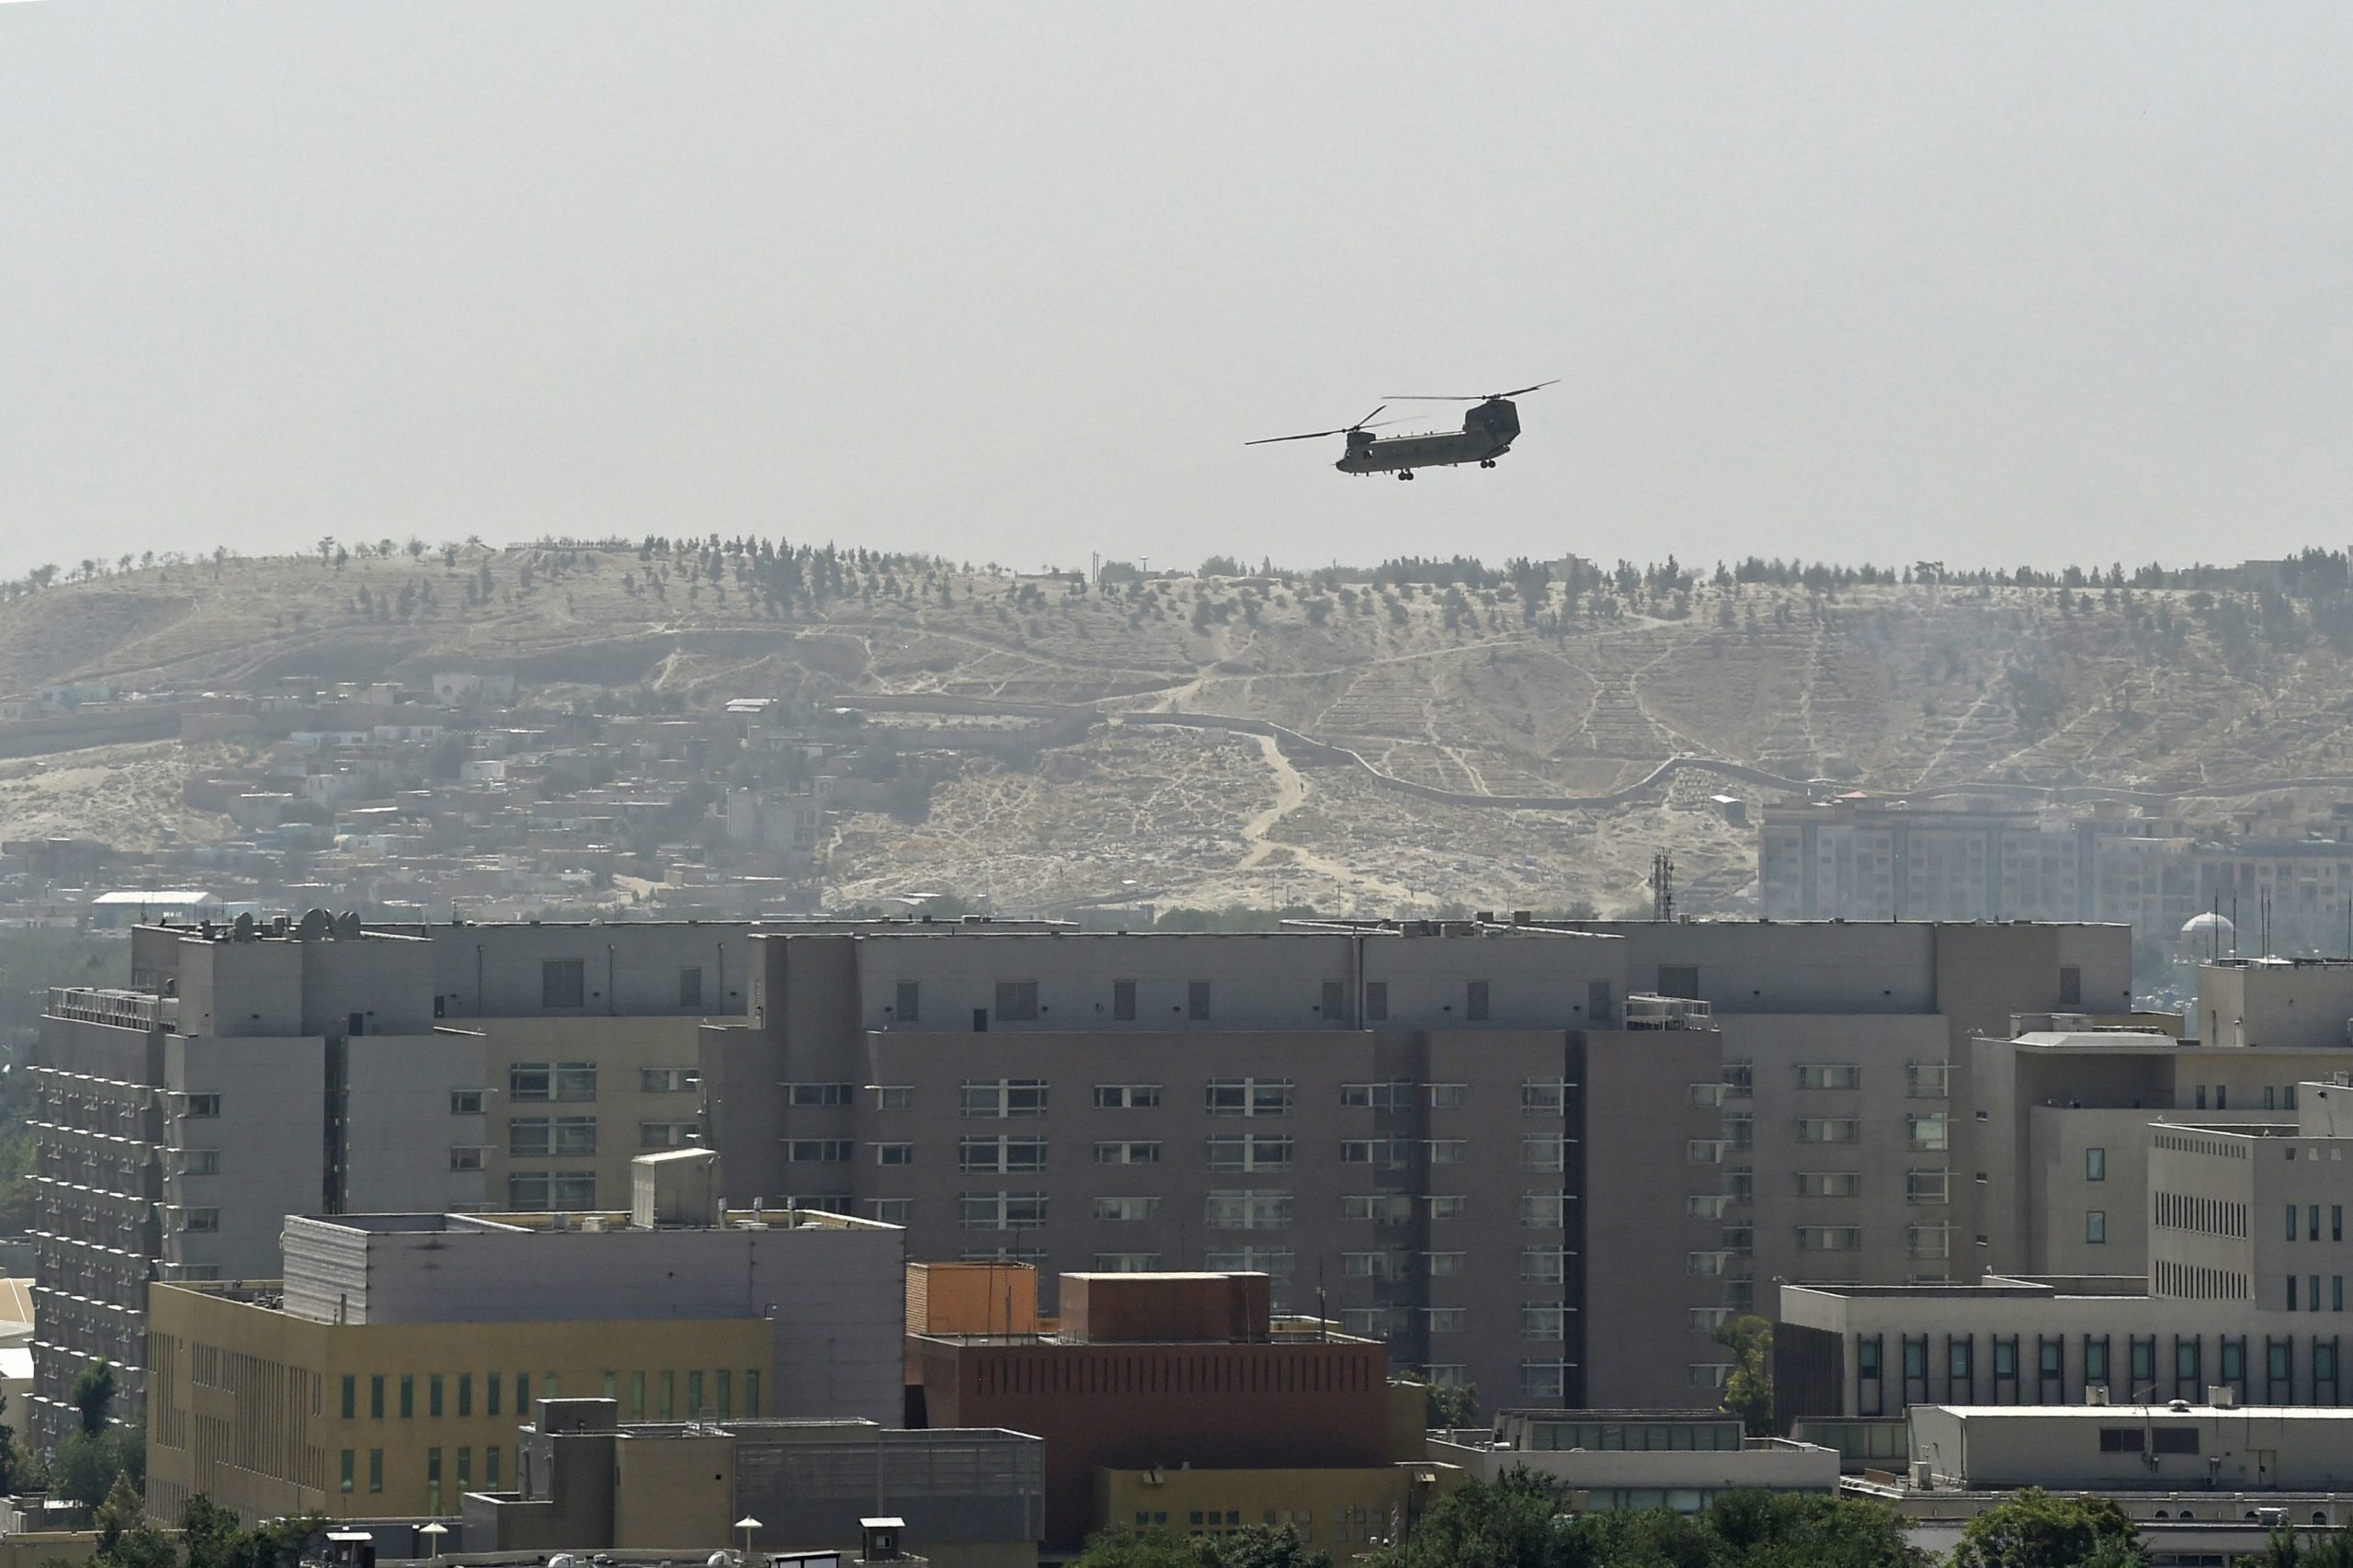 A U.S. Chinook military helicopter flies above the US embassy in Kabul on August 15, 2021. (Photo by WAKIL KOHSAR/AFP via Getty Images)